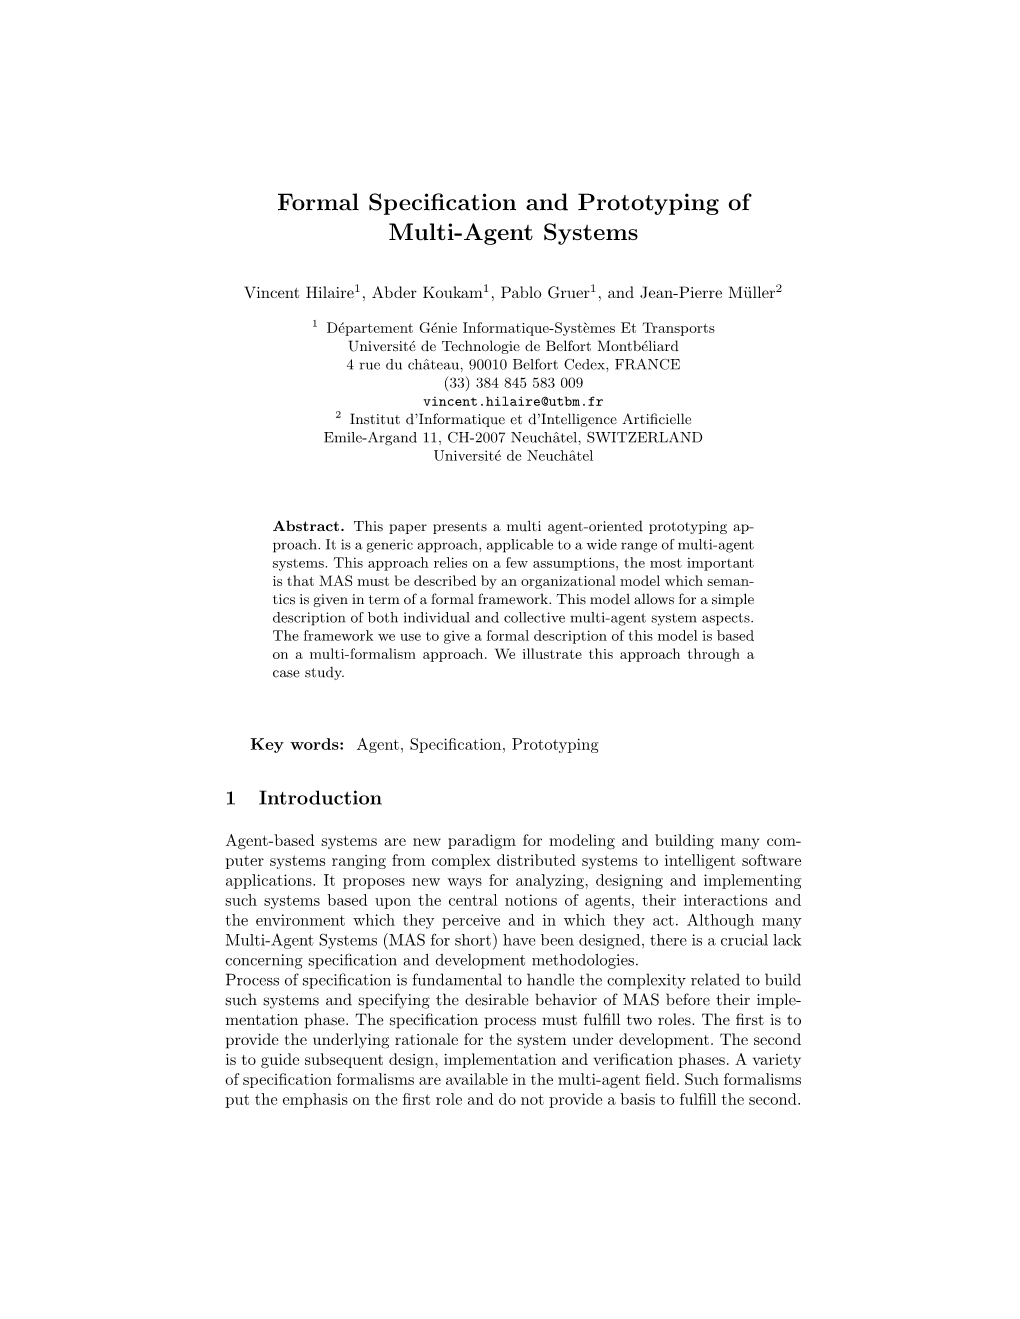 Formal Specification and Prototyping of Multi-Agent Systems